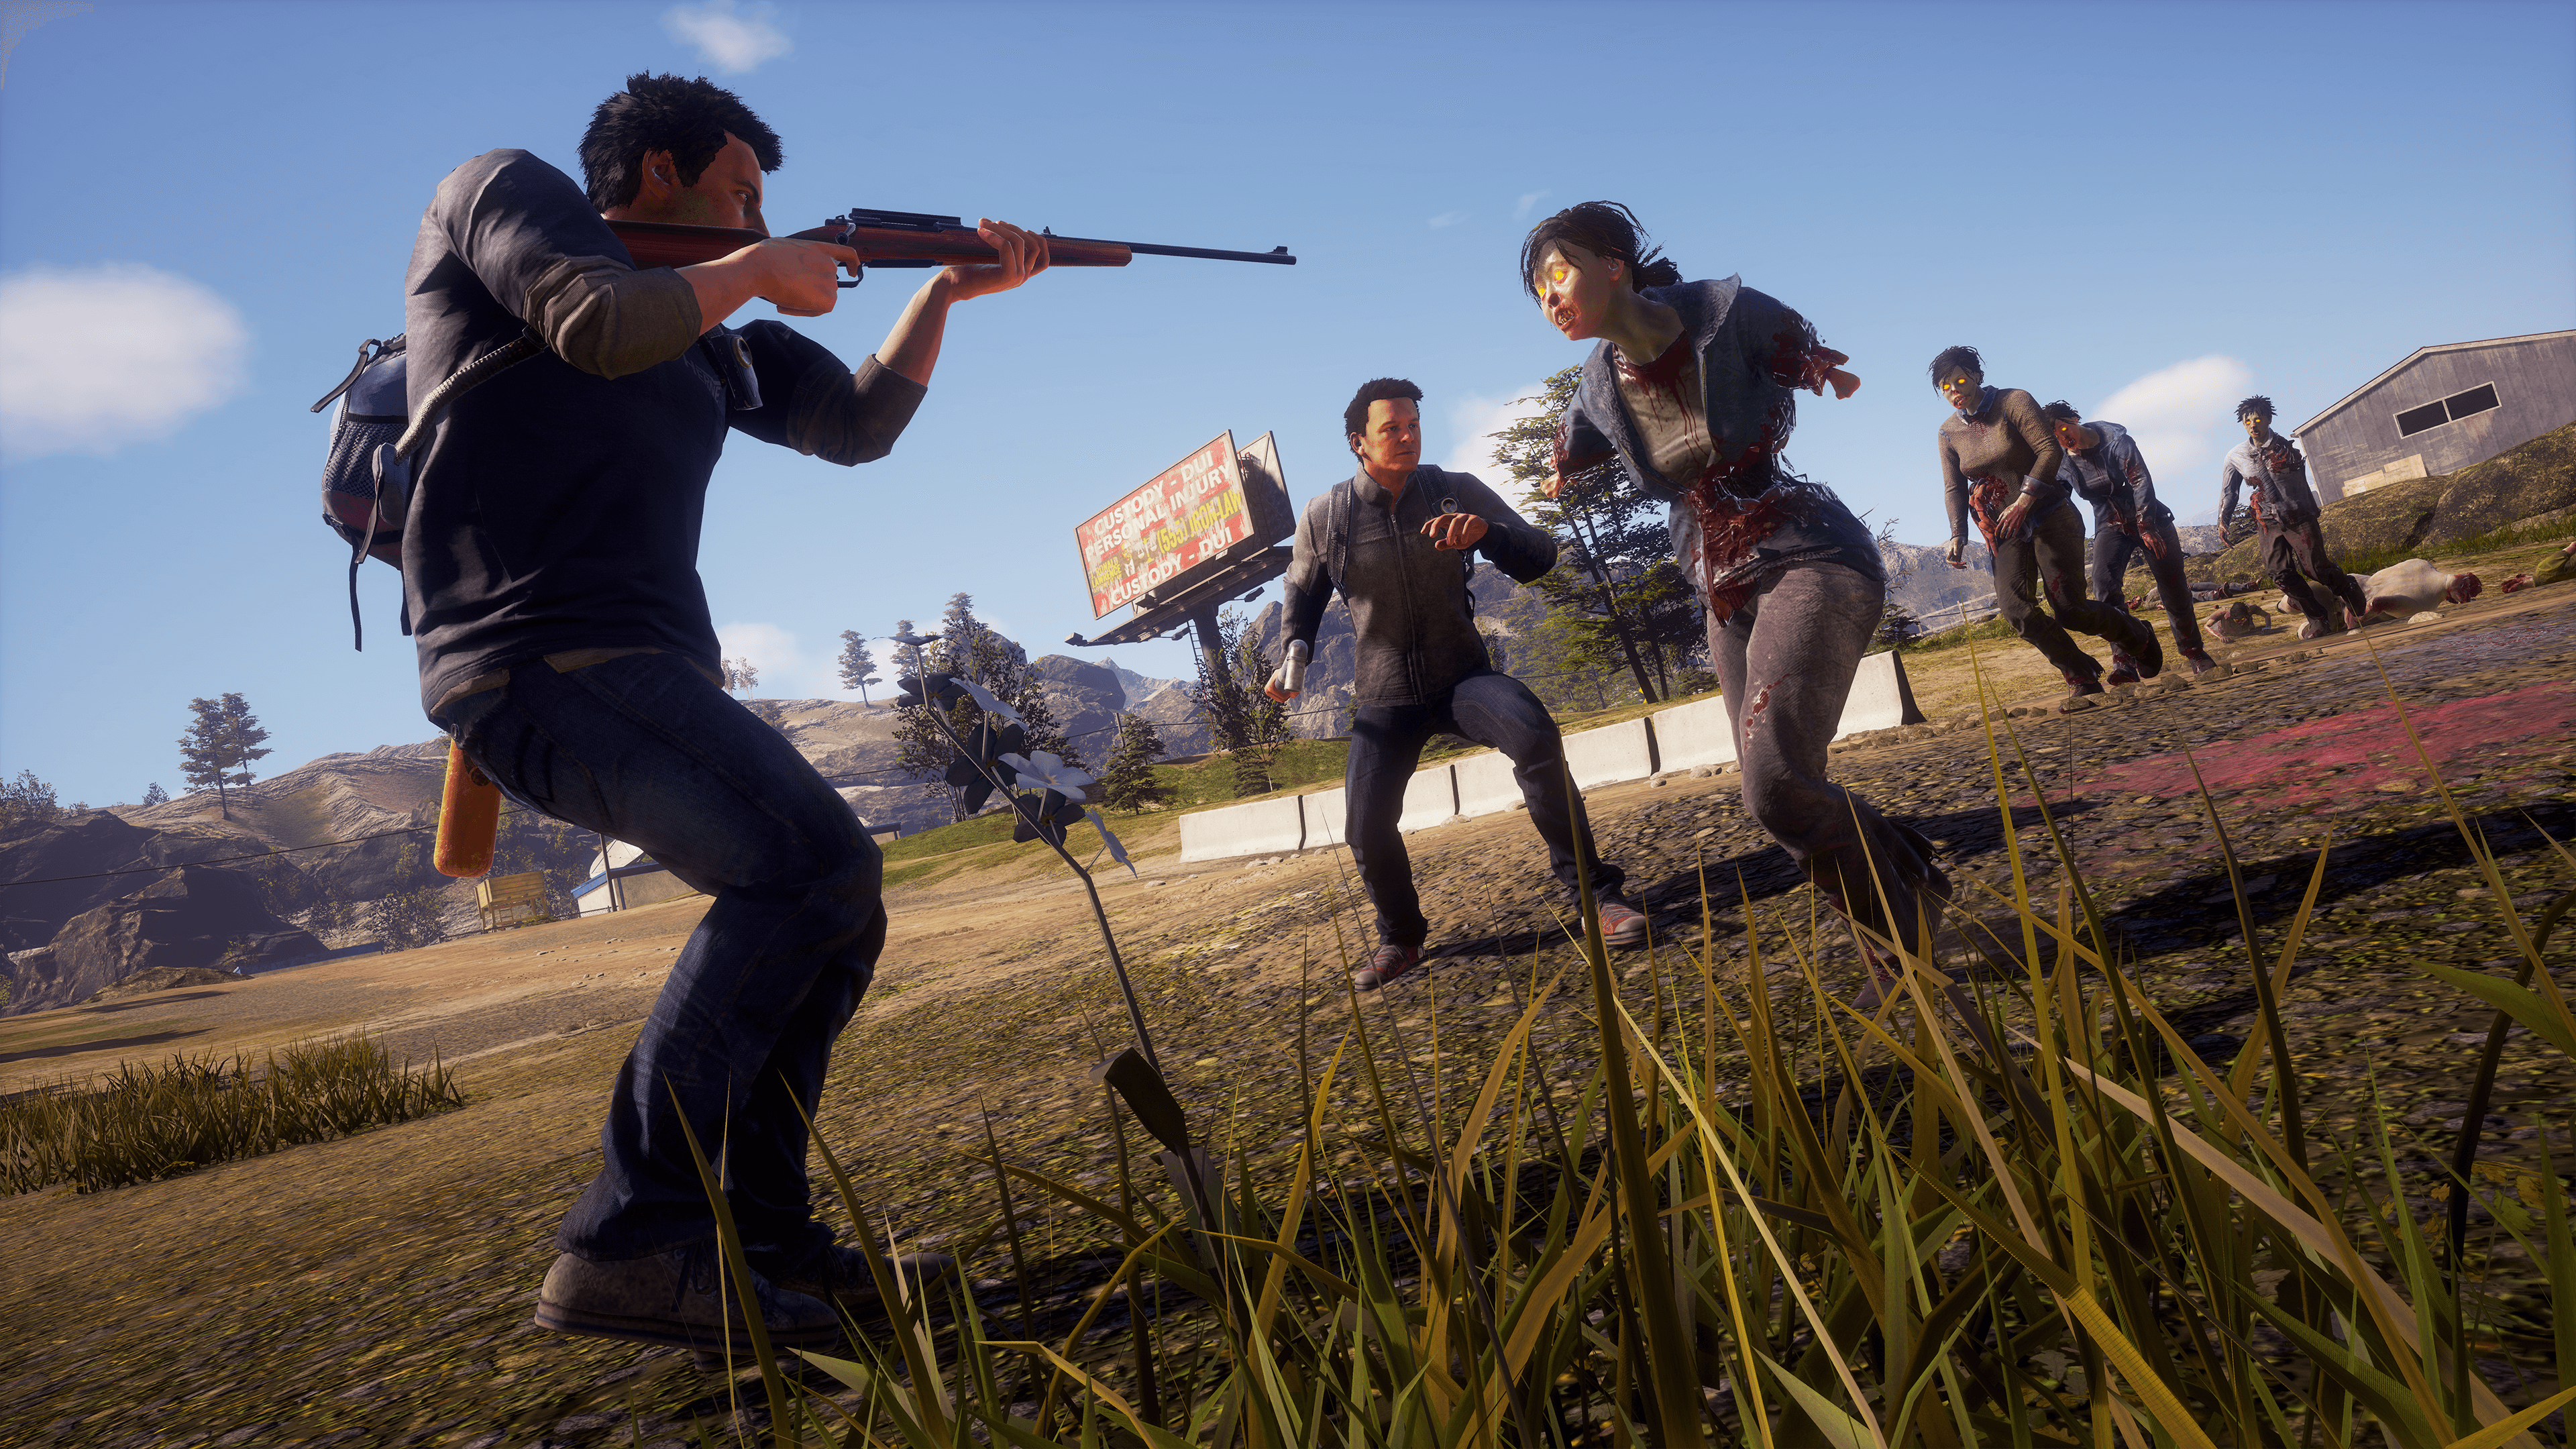 State of Decay 3 Features In-Game Cinematics, Undead Labs Collaborating  With Other XGS Teams : r/XboxSeriesX